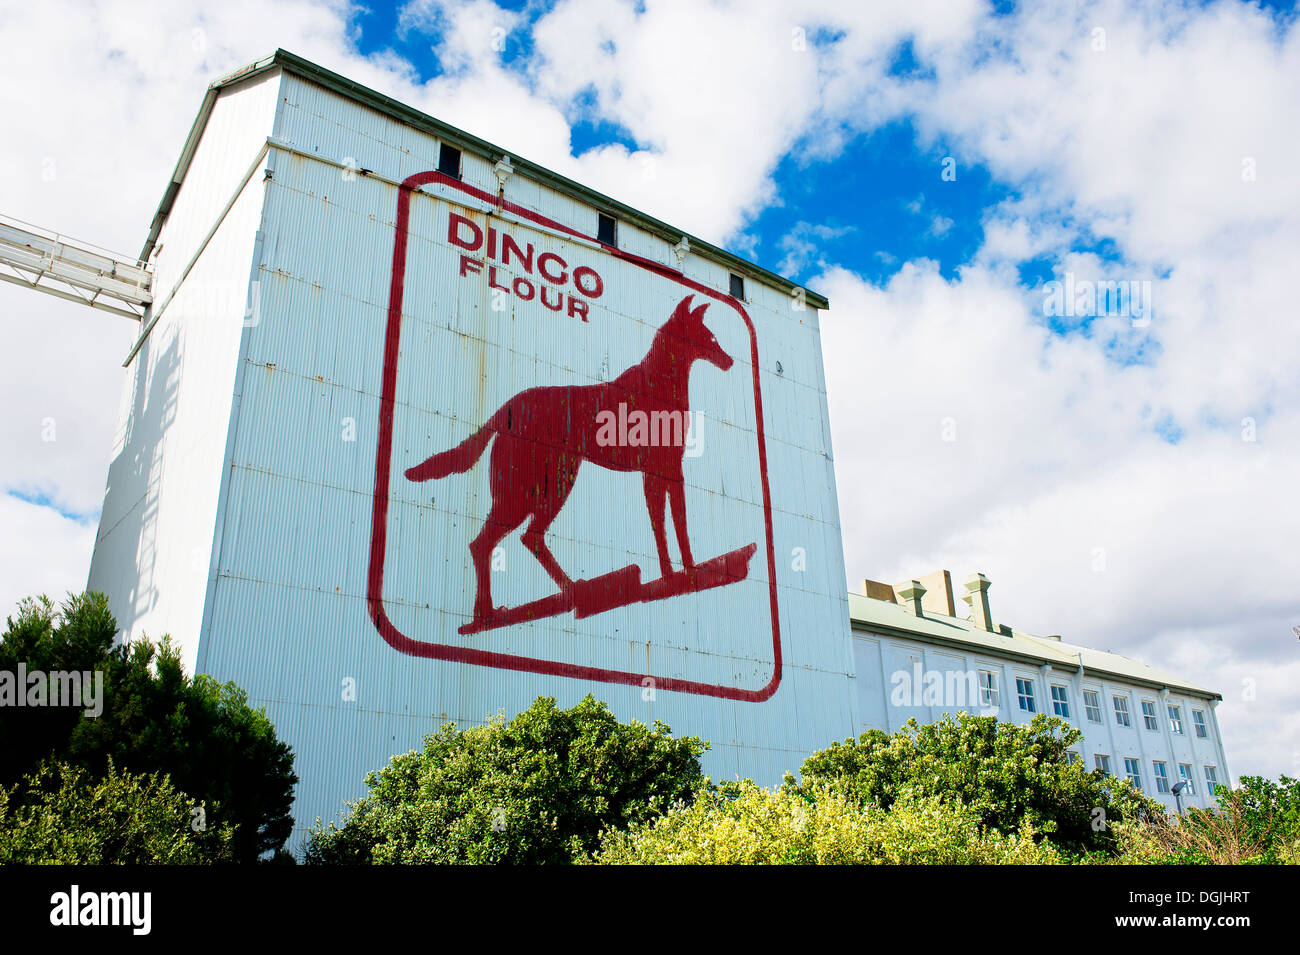 The Dingo Flour sign on the side of the Great Southern Roller Flour Mills in Fremantle in Western Australia. Stock Photo